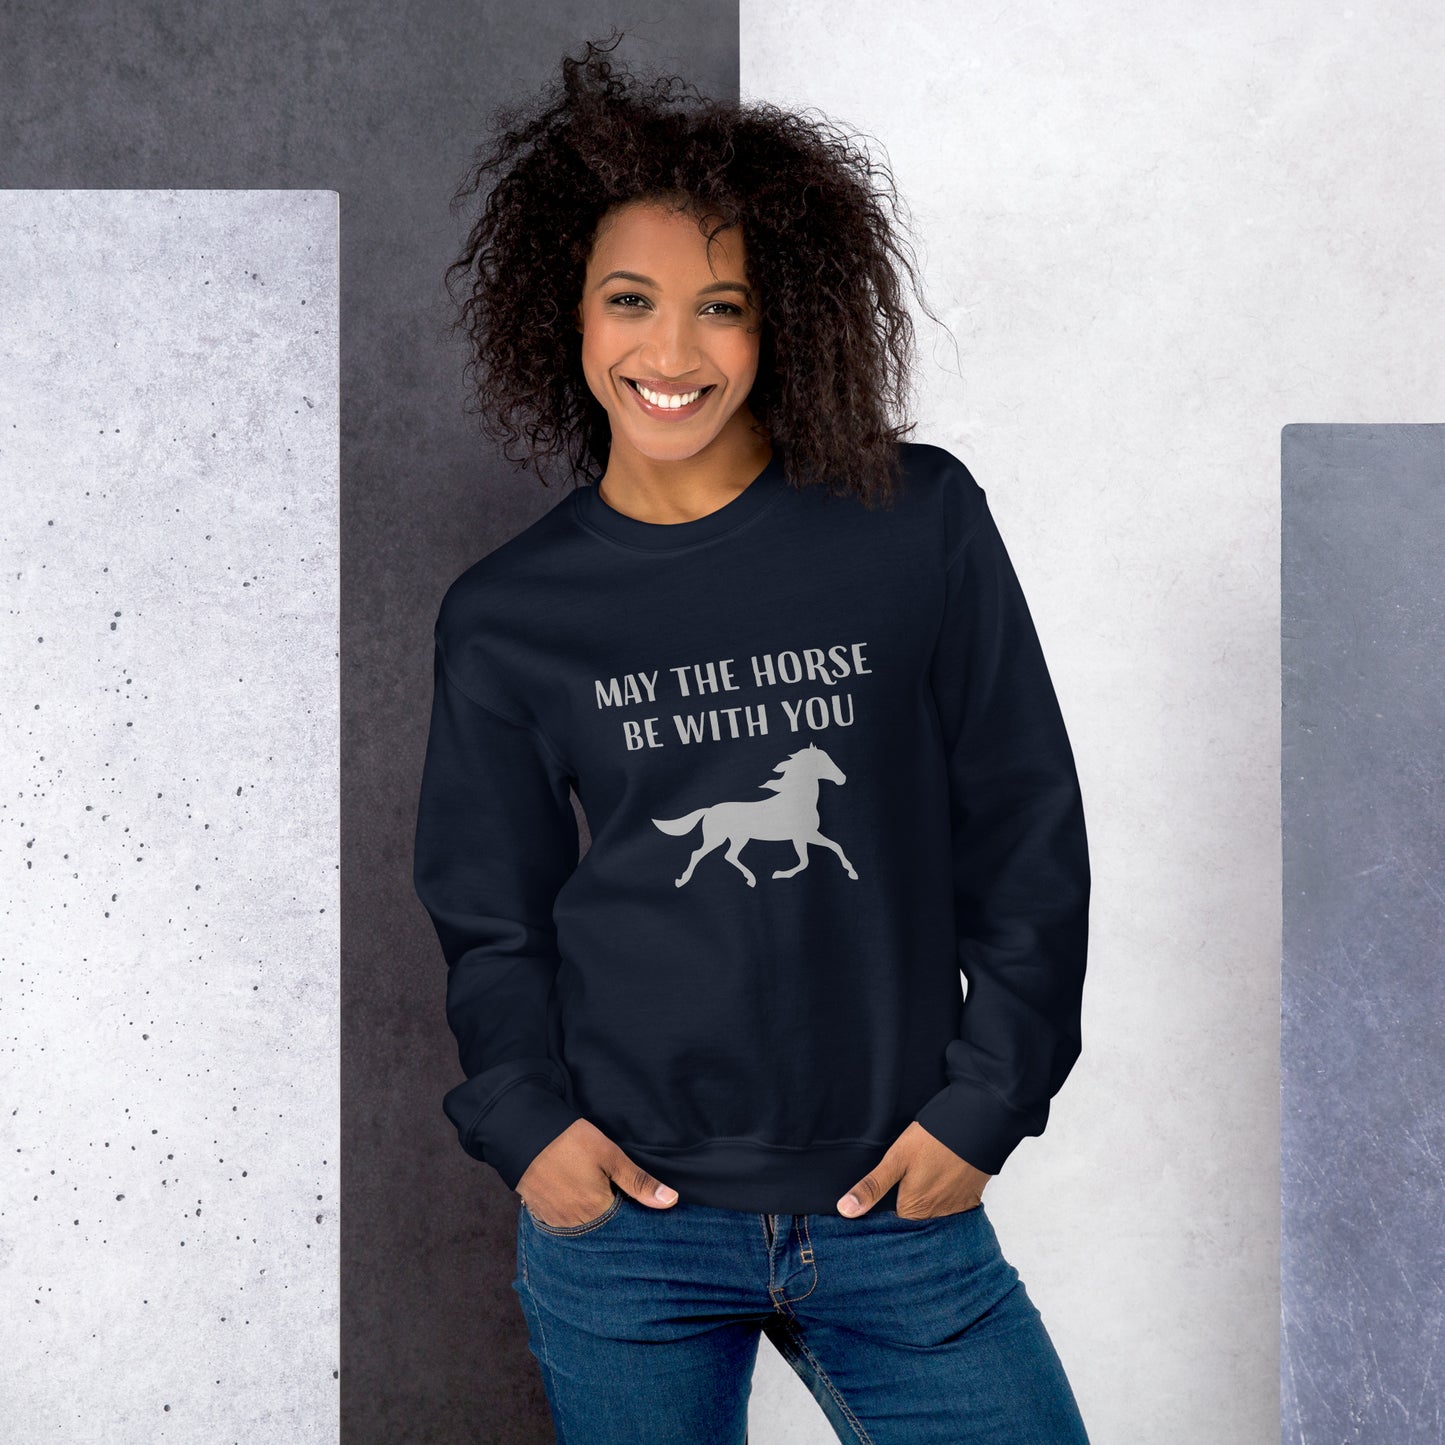 May the Horse be with You - Unisex Sweatshirt